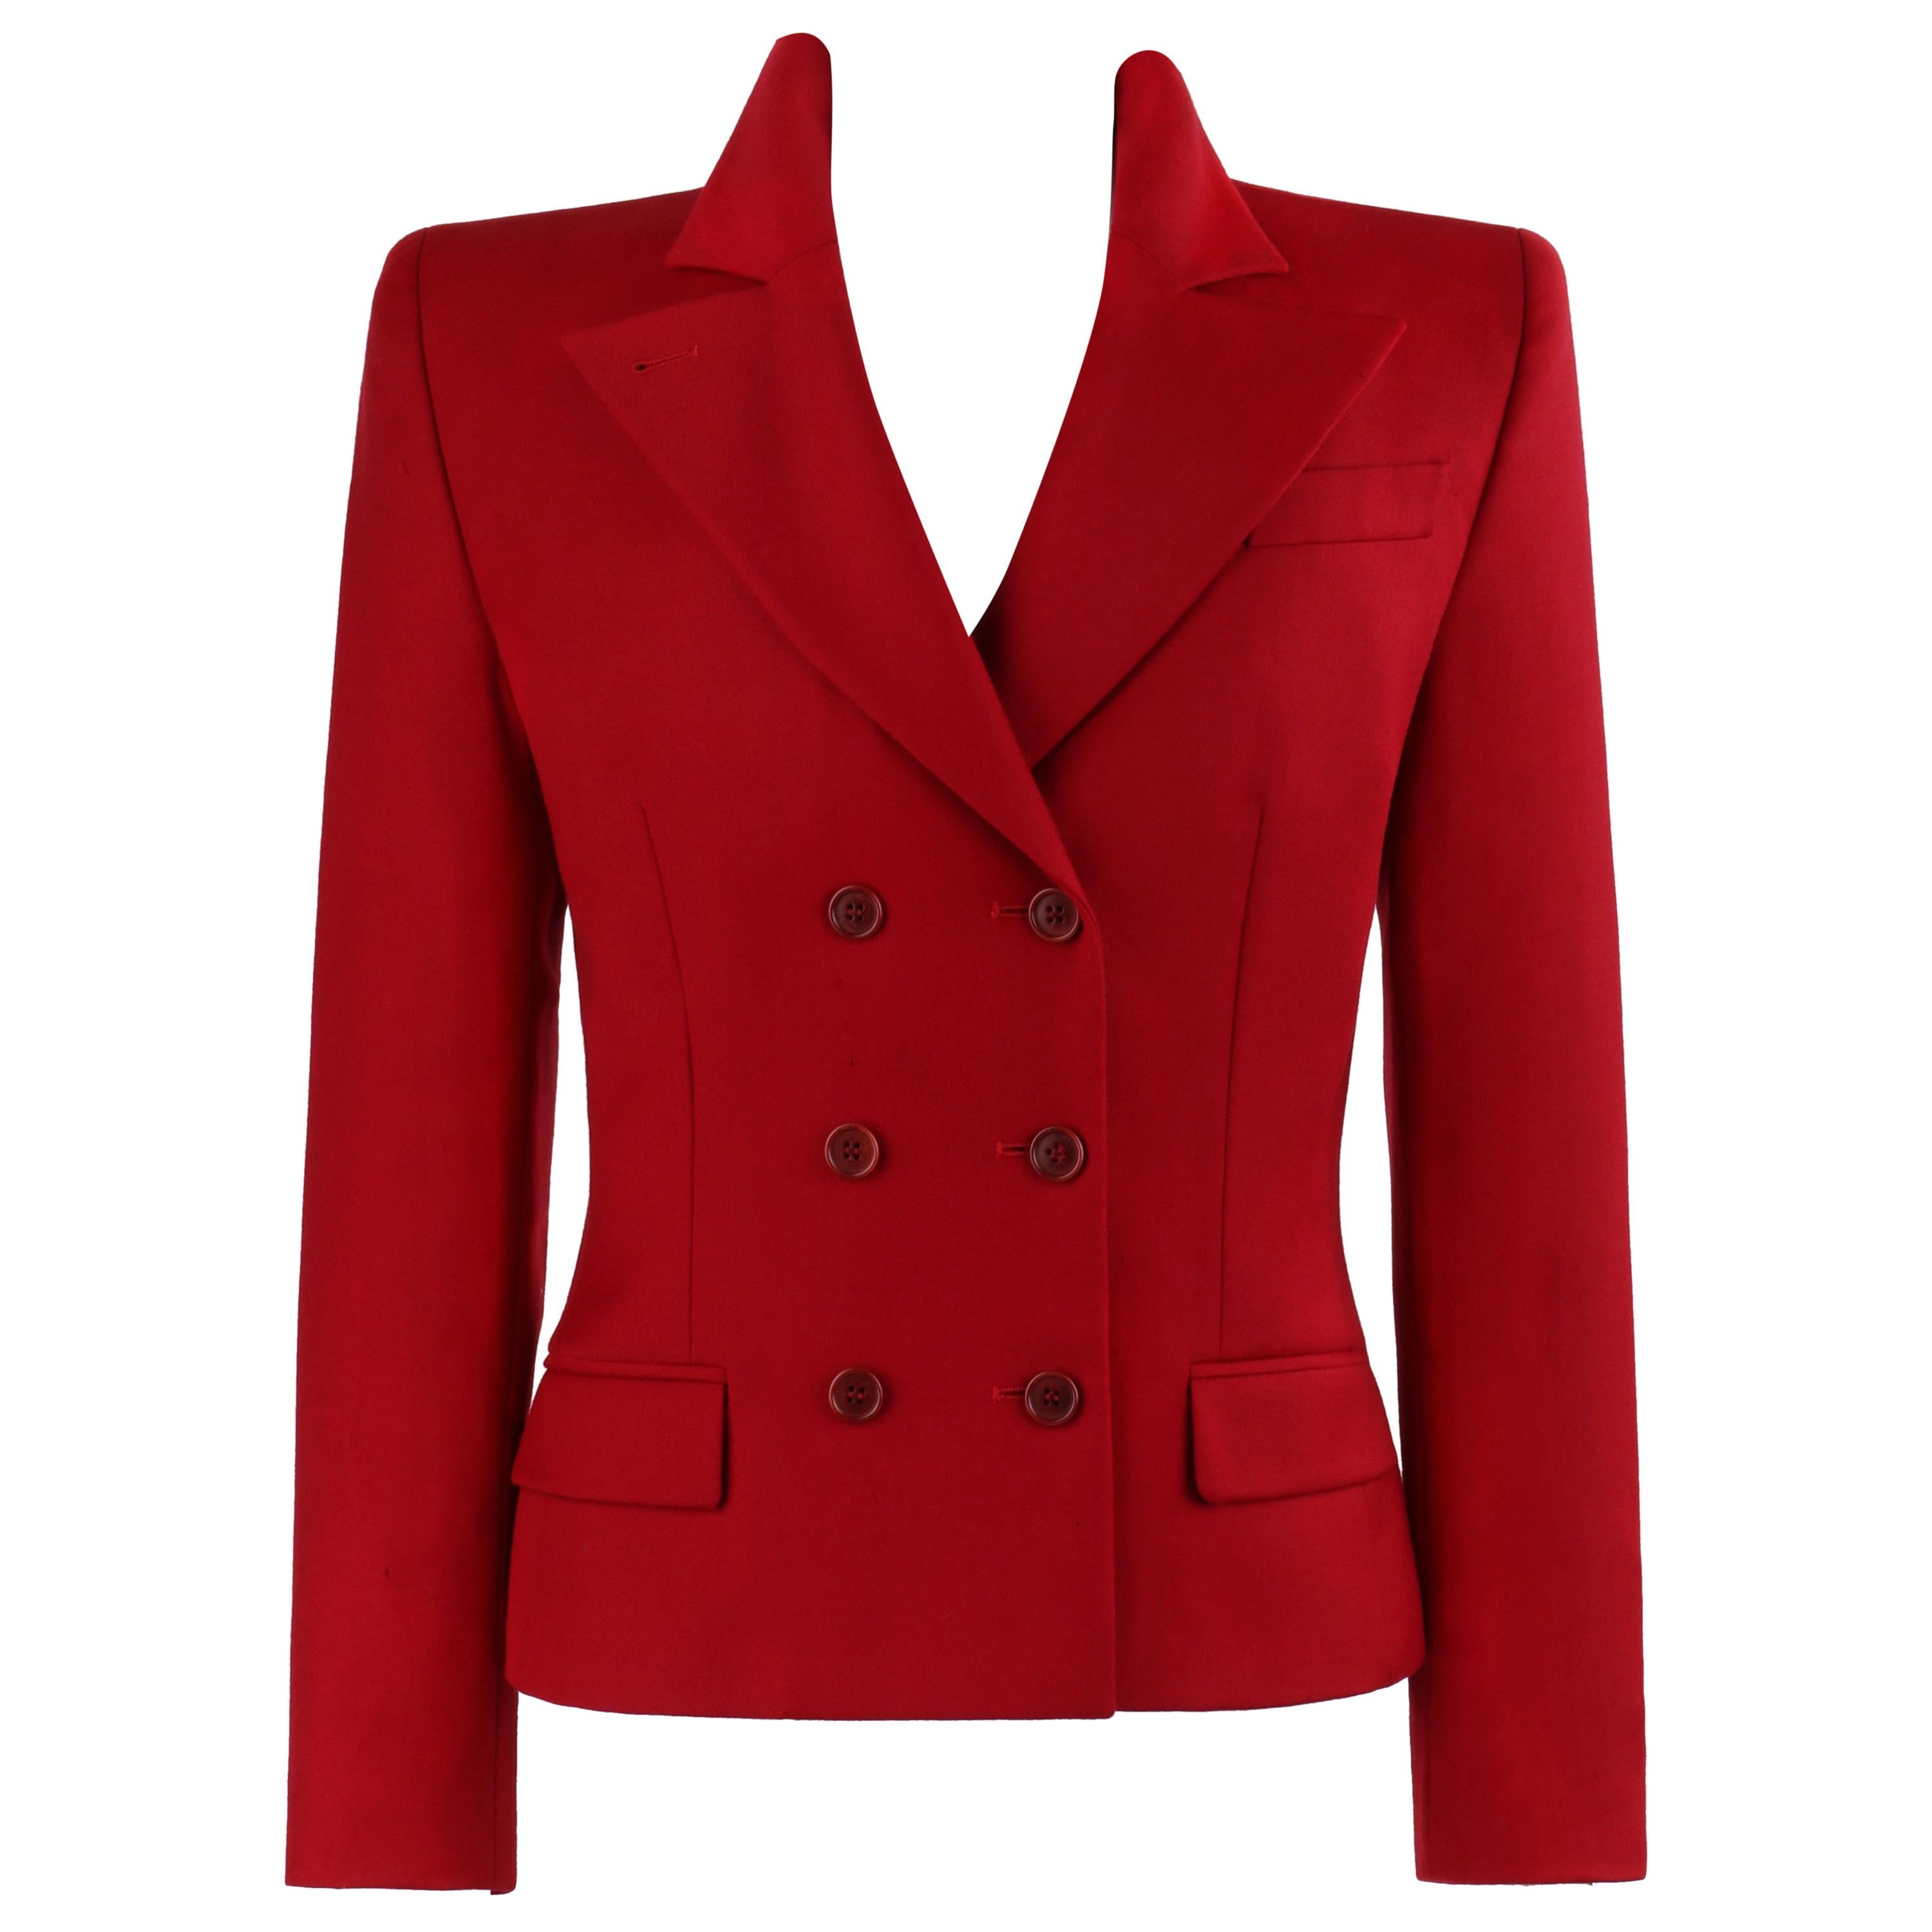 ALEXANDER McQUEEN A/W 1998 “Joan” Red Double Breasted Button Front Blazer Jacket For Sale